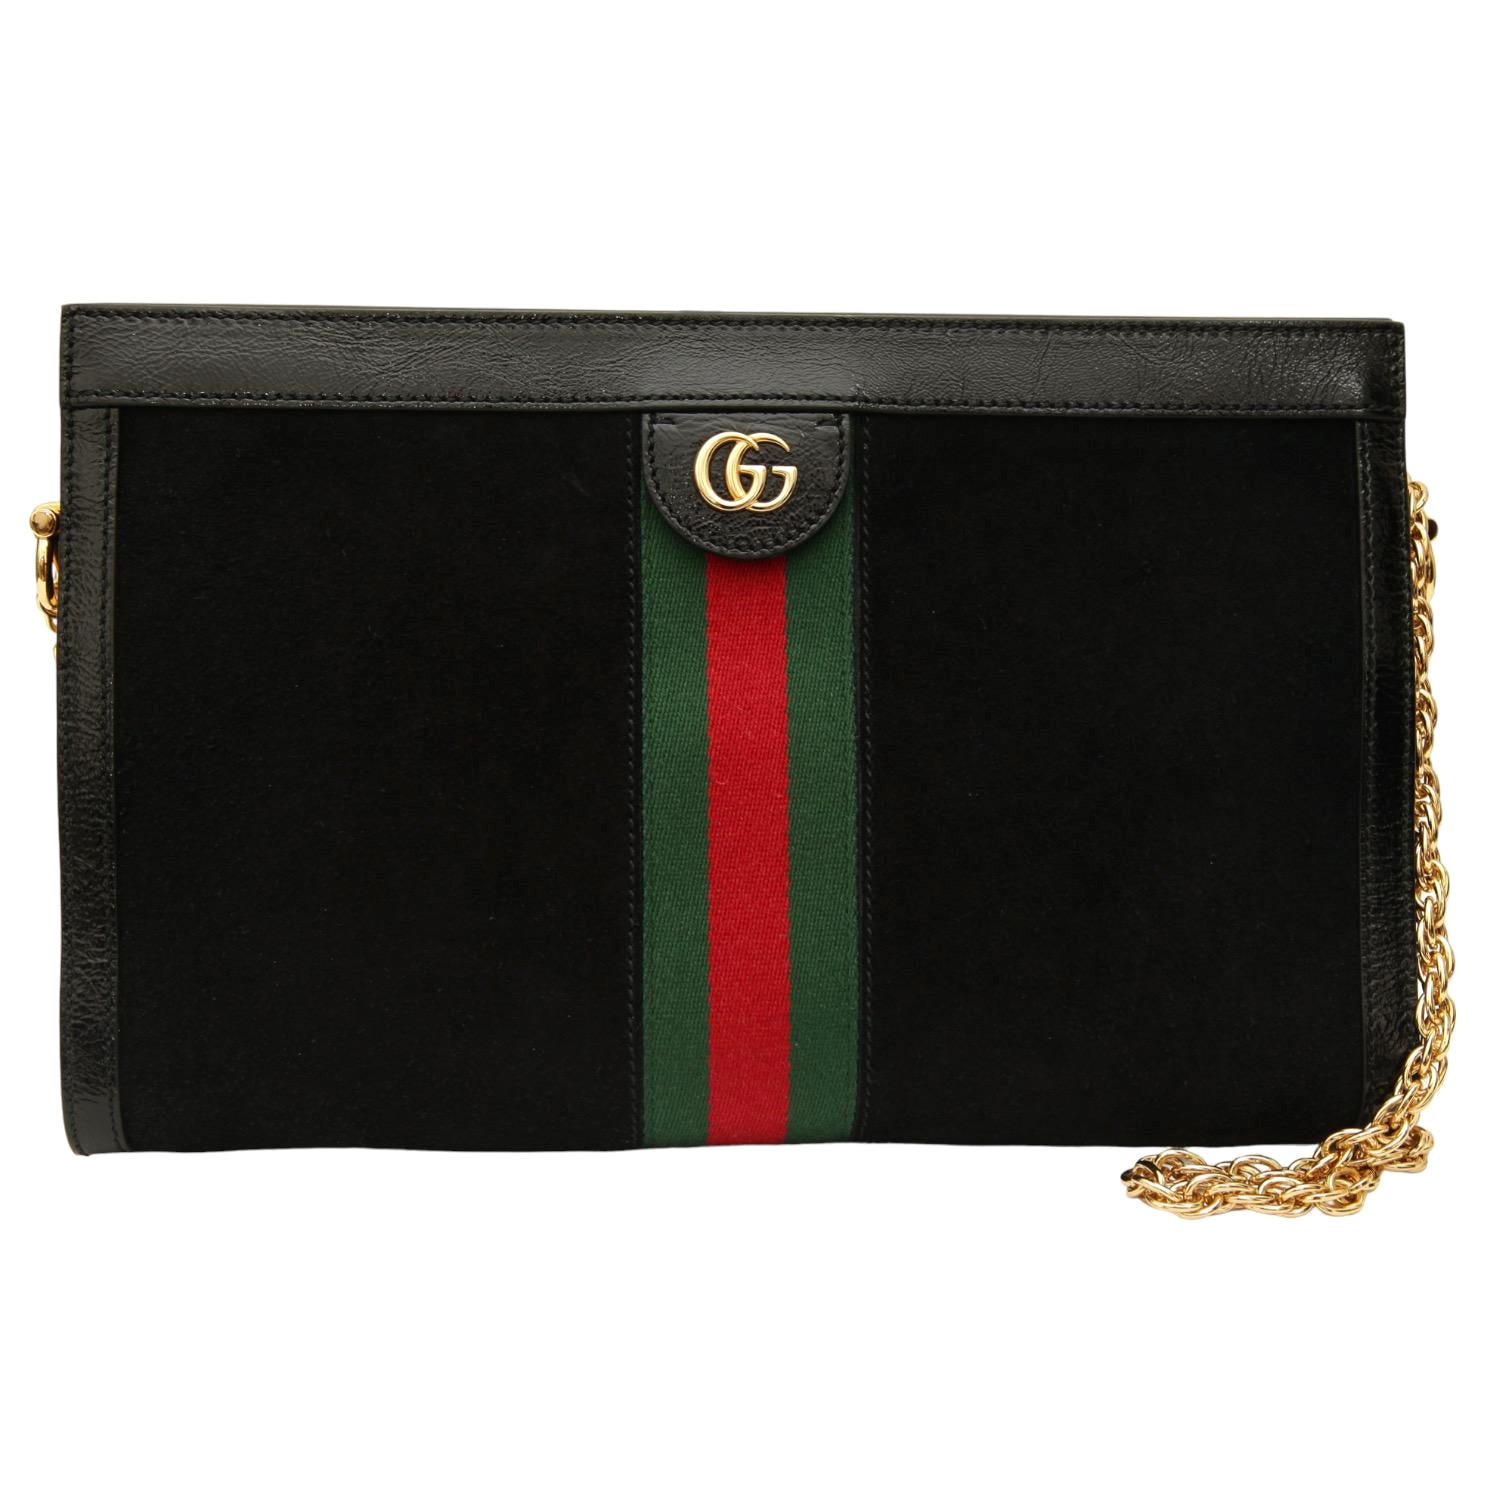 GUCCI Black Suede Patent Leather Bag Medium Ophidia Web Green Chain Gold